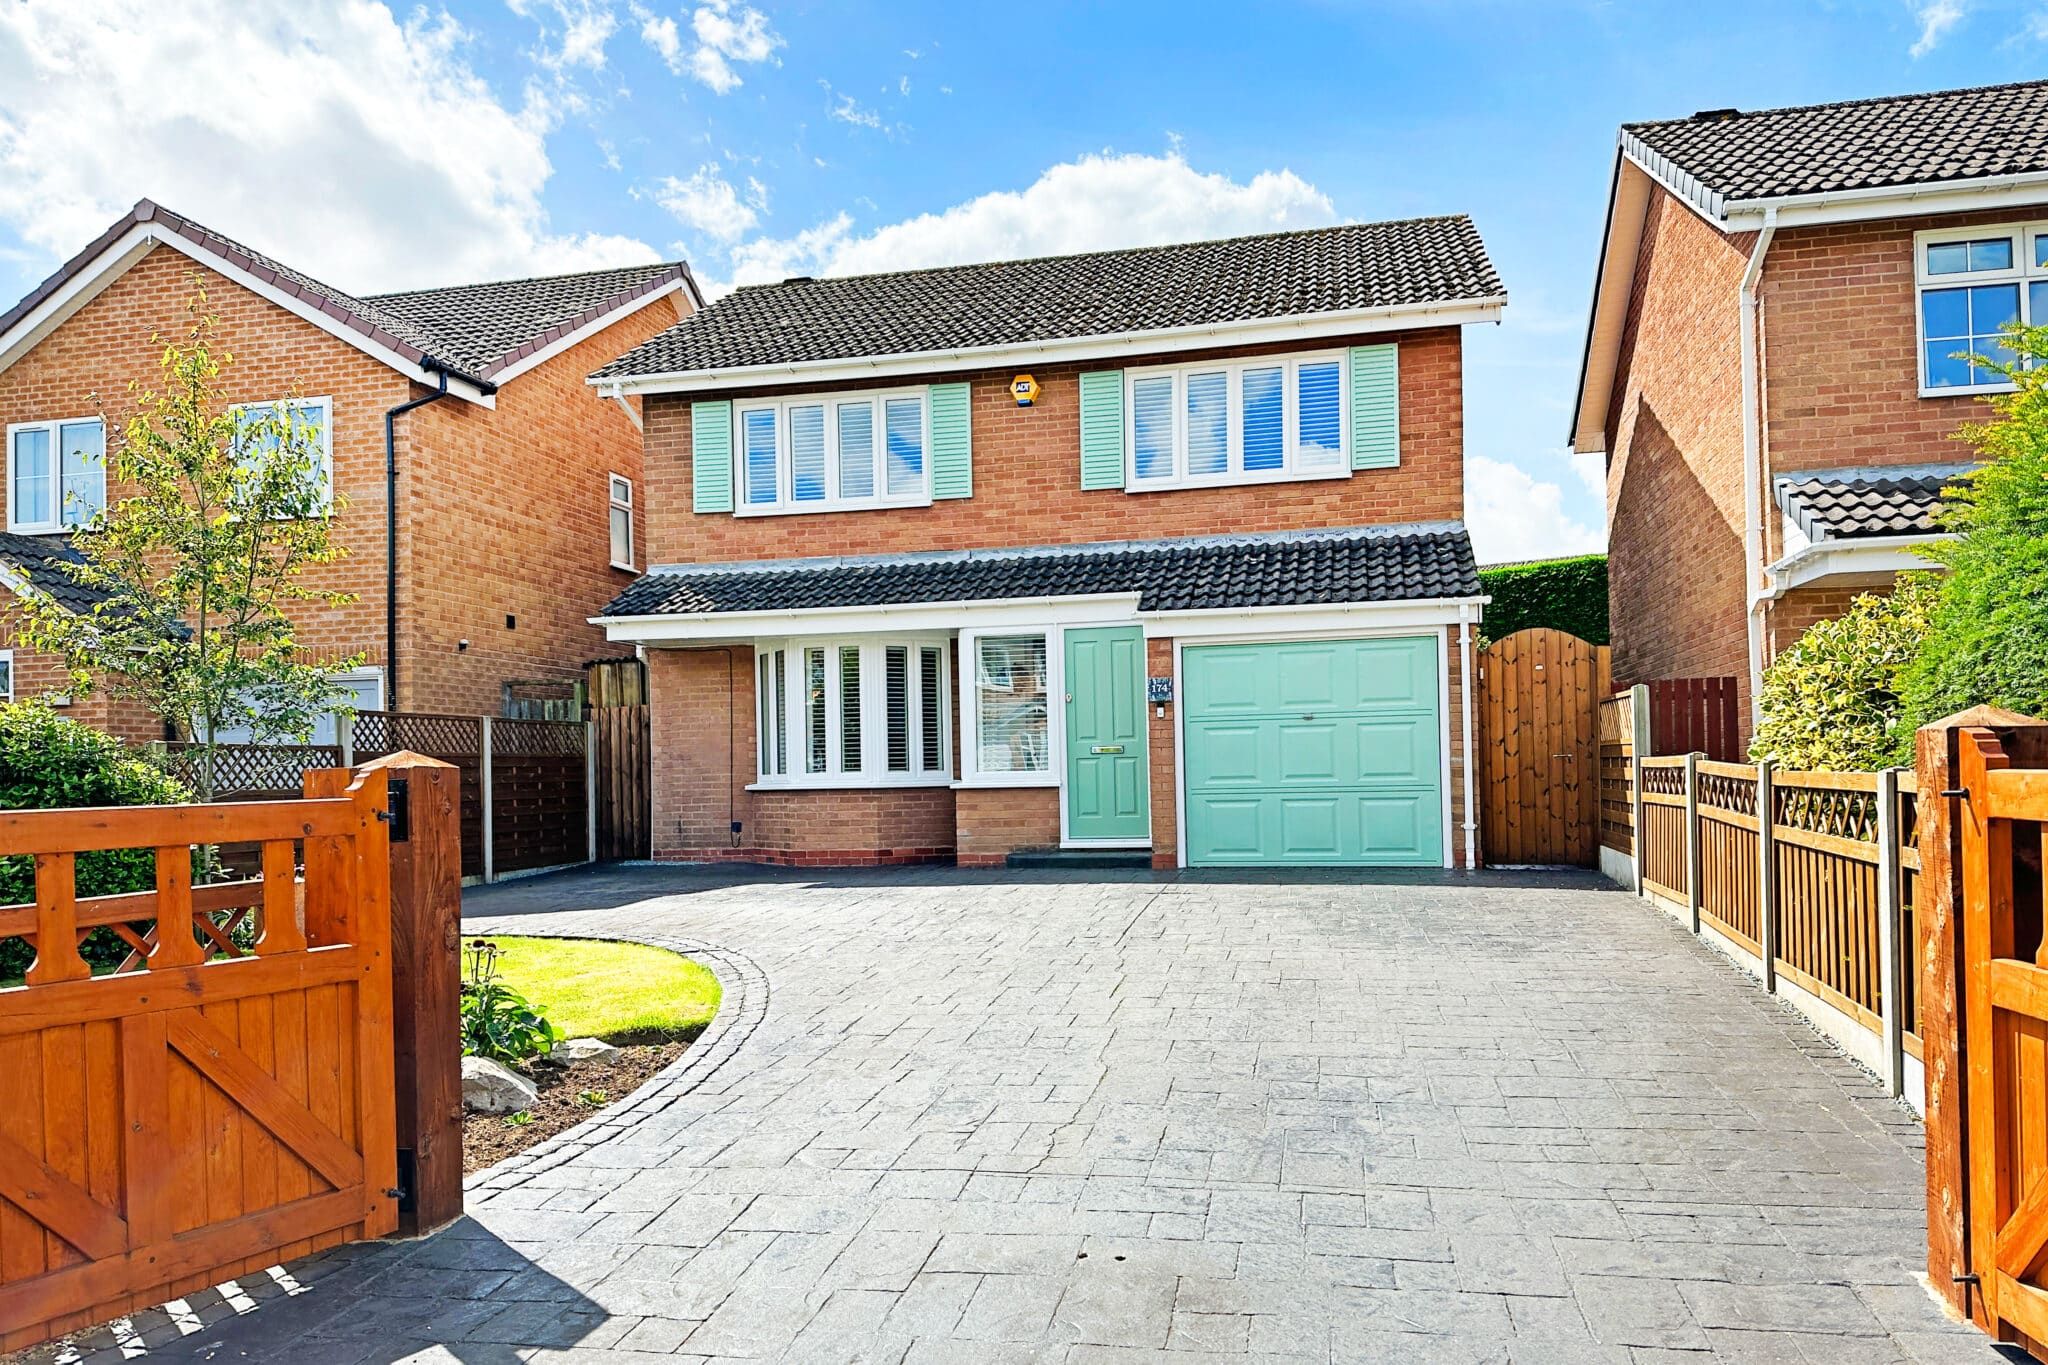 Starbold Crescent, Knowle, Solihull, Solihull, B93 9LB